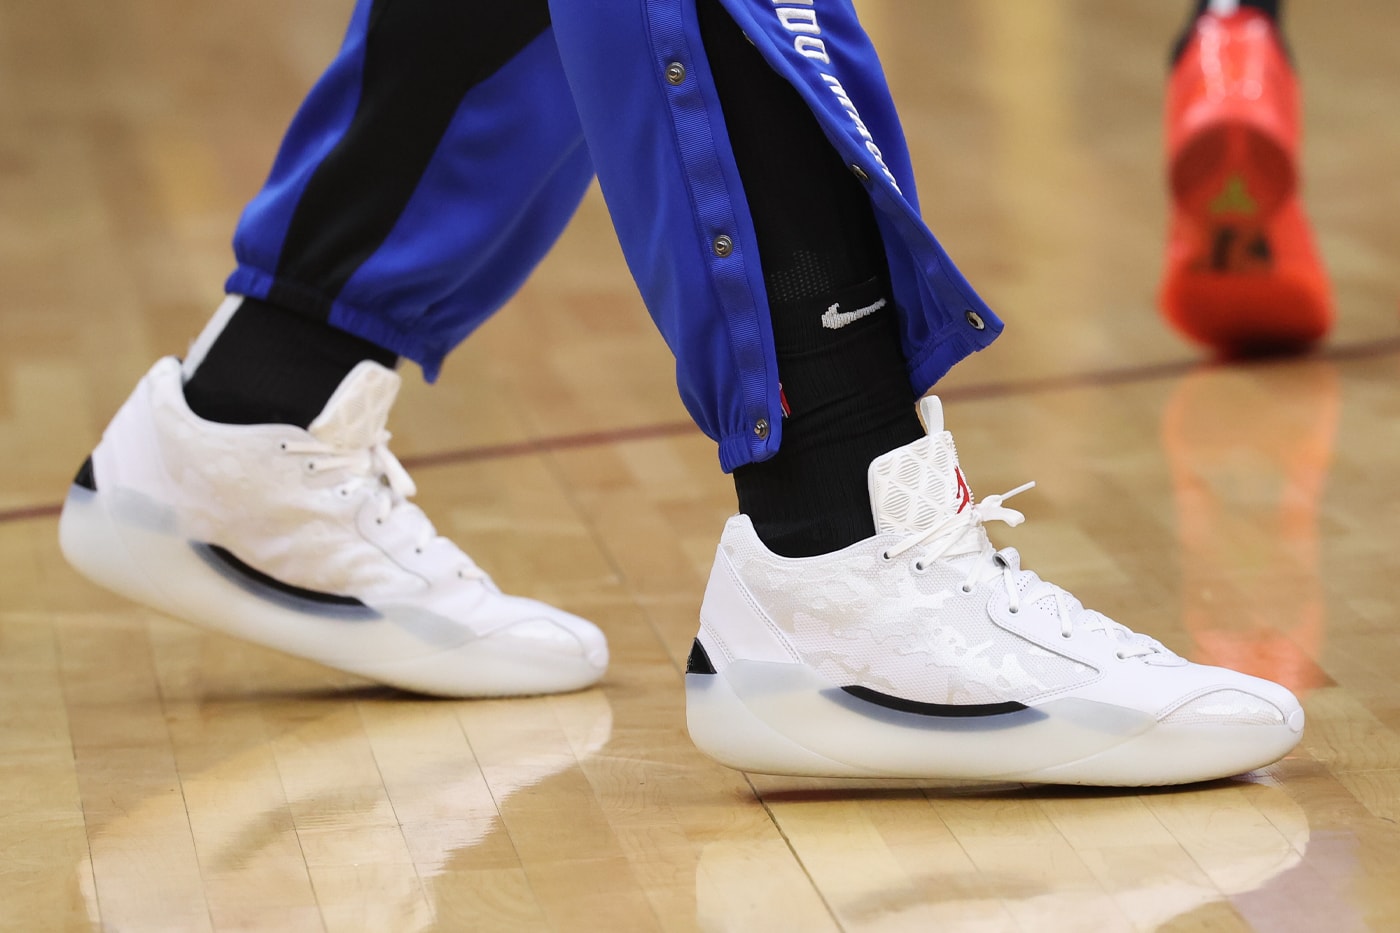 Paolo Banchero Debuts New Air Jordan 39 Silhouette During NBA Playoffs orlando magic basketball player cleveland cavaliers game 1 easter conference playoffs michael jordan